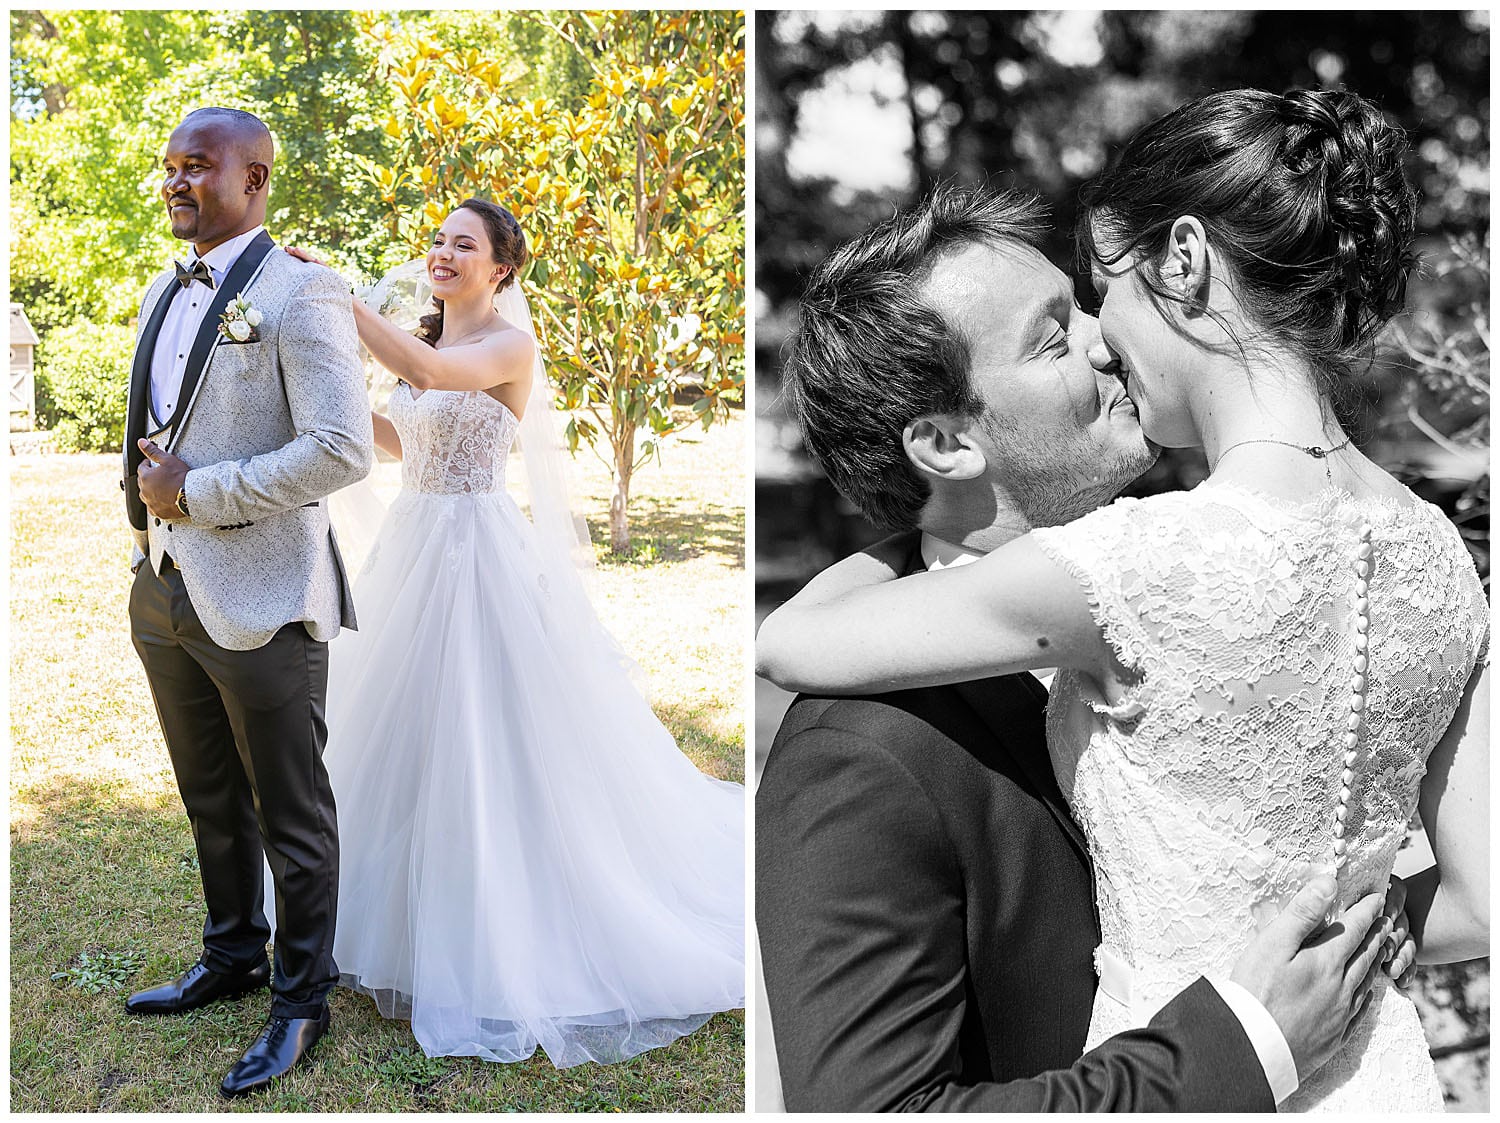 Marie-Calfopoulos-photographe-mariage-wedding-photographer-Provence-Avignon-Luberon-Vaucluse-first-look-chateau-provencal